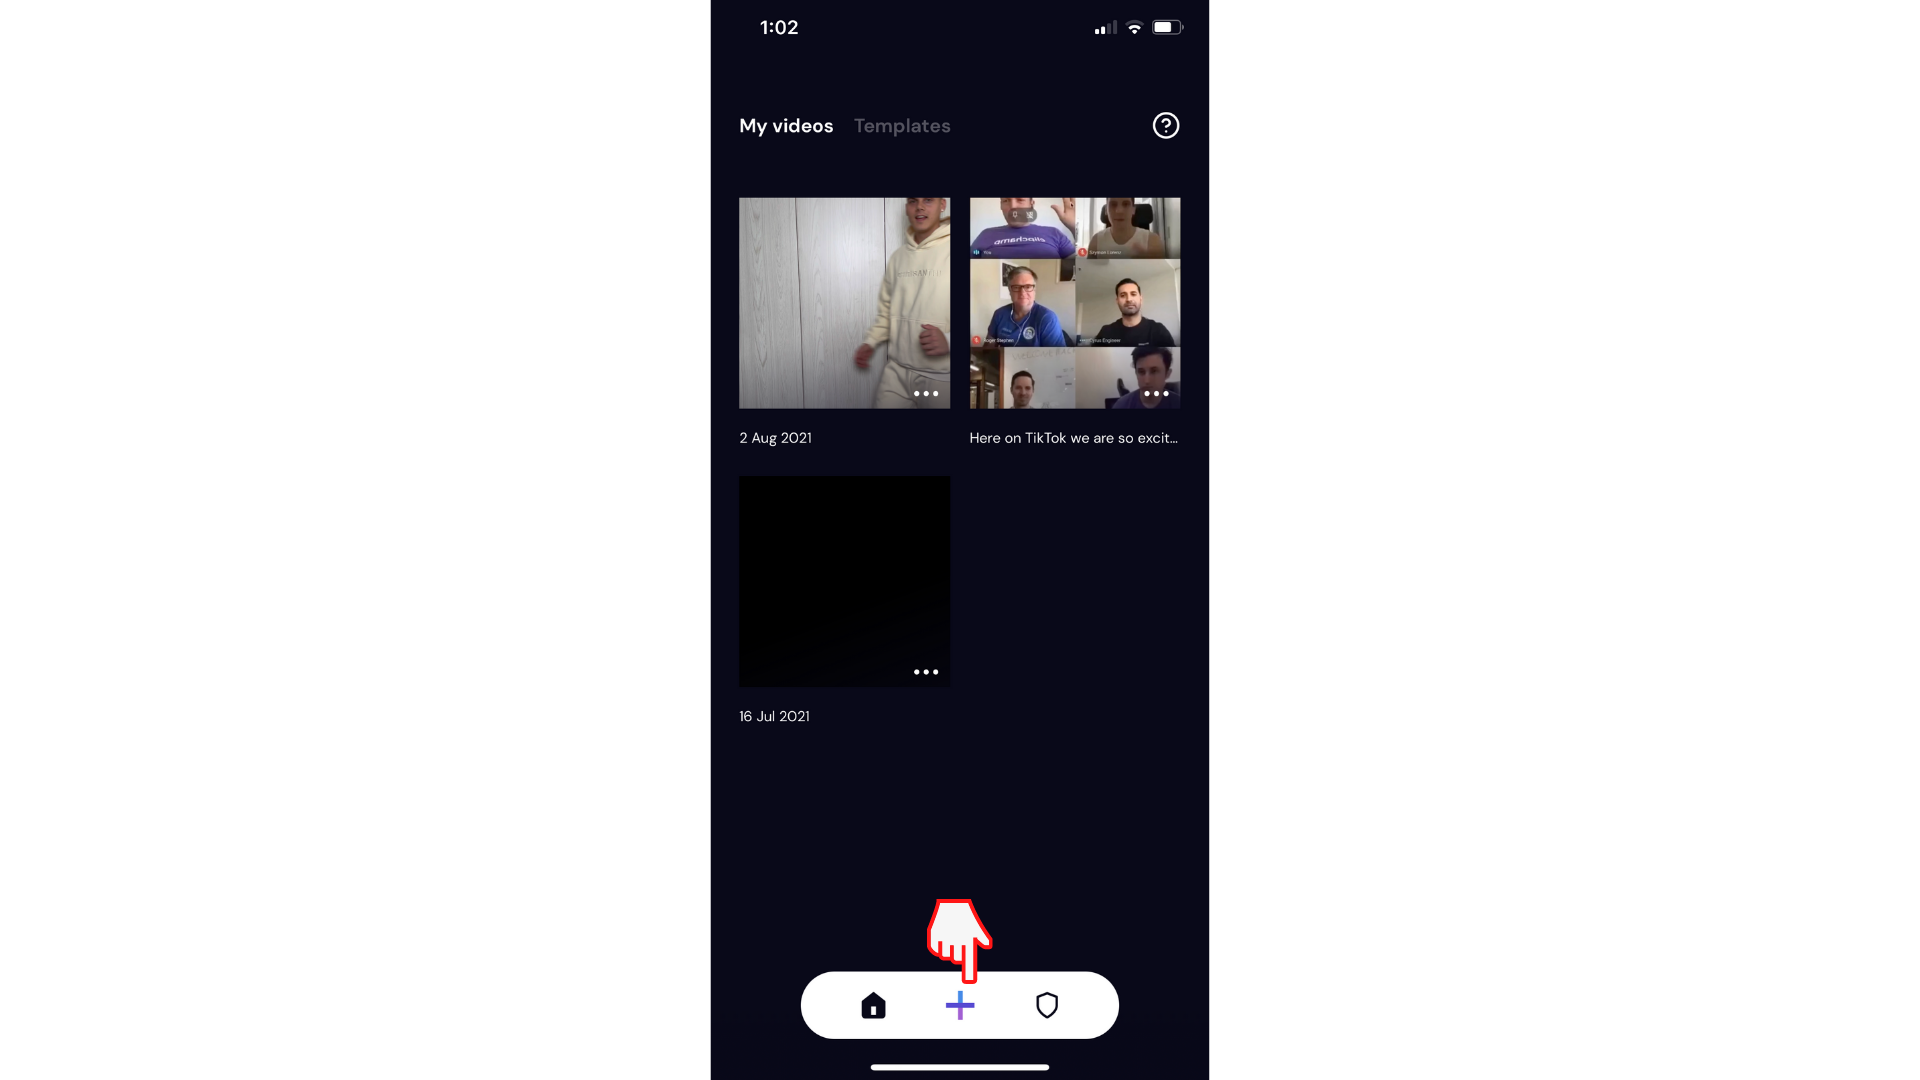 User tapping the plus button to create a new video